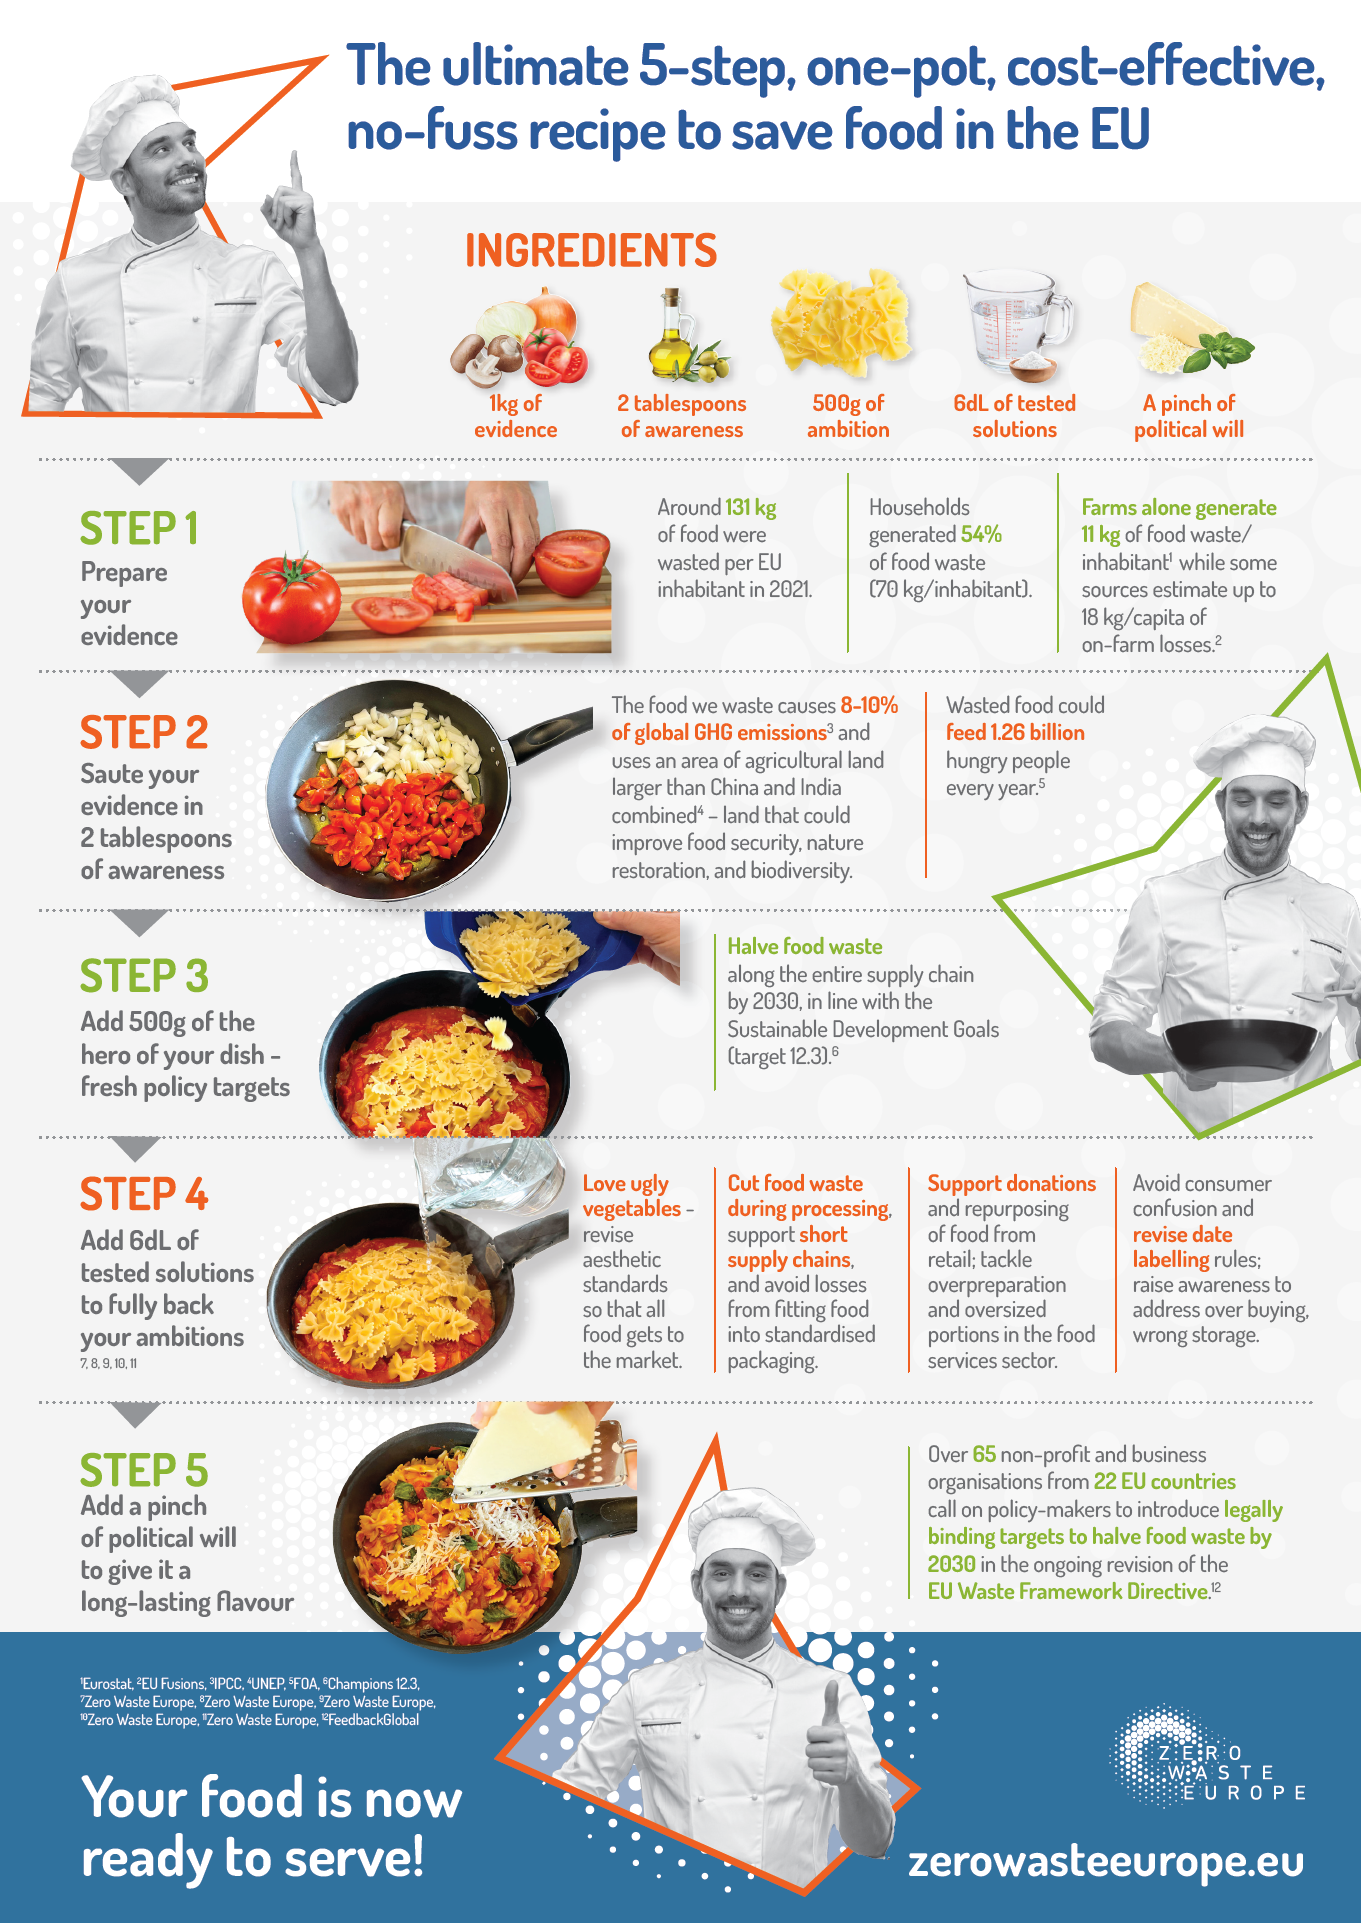 The ultimate 5-step, one-pot, cost-effective, no-fuss recipe to save food in the EU – Infographic